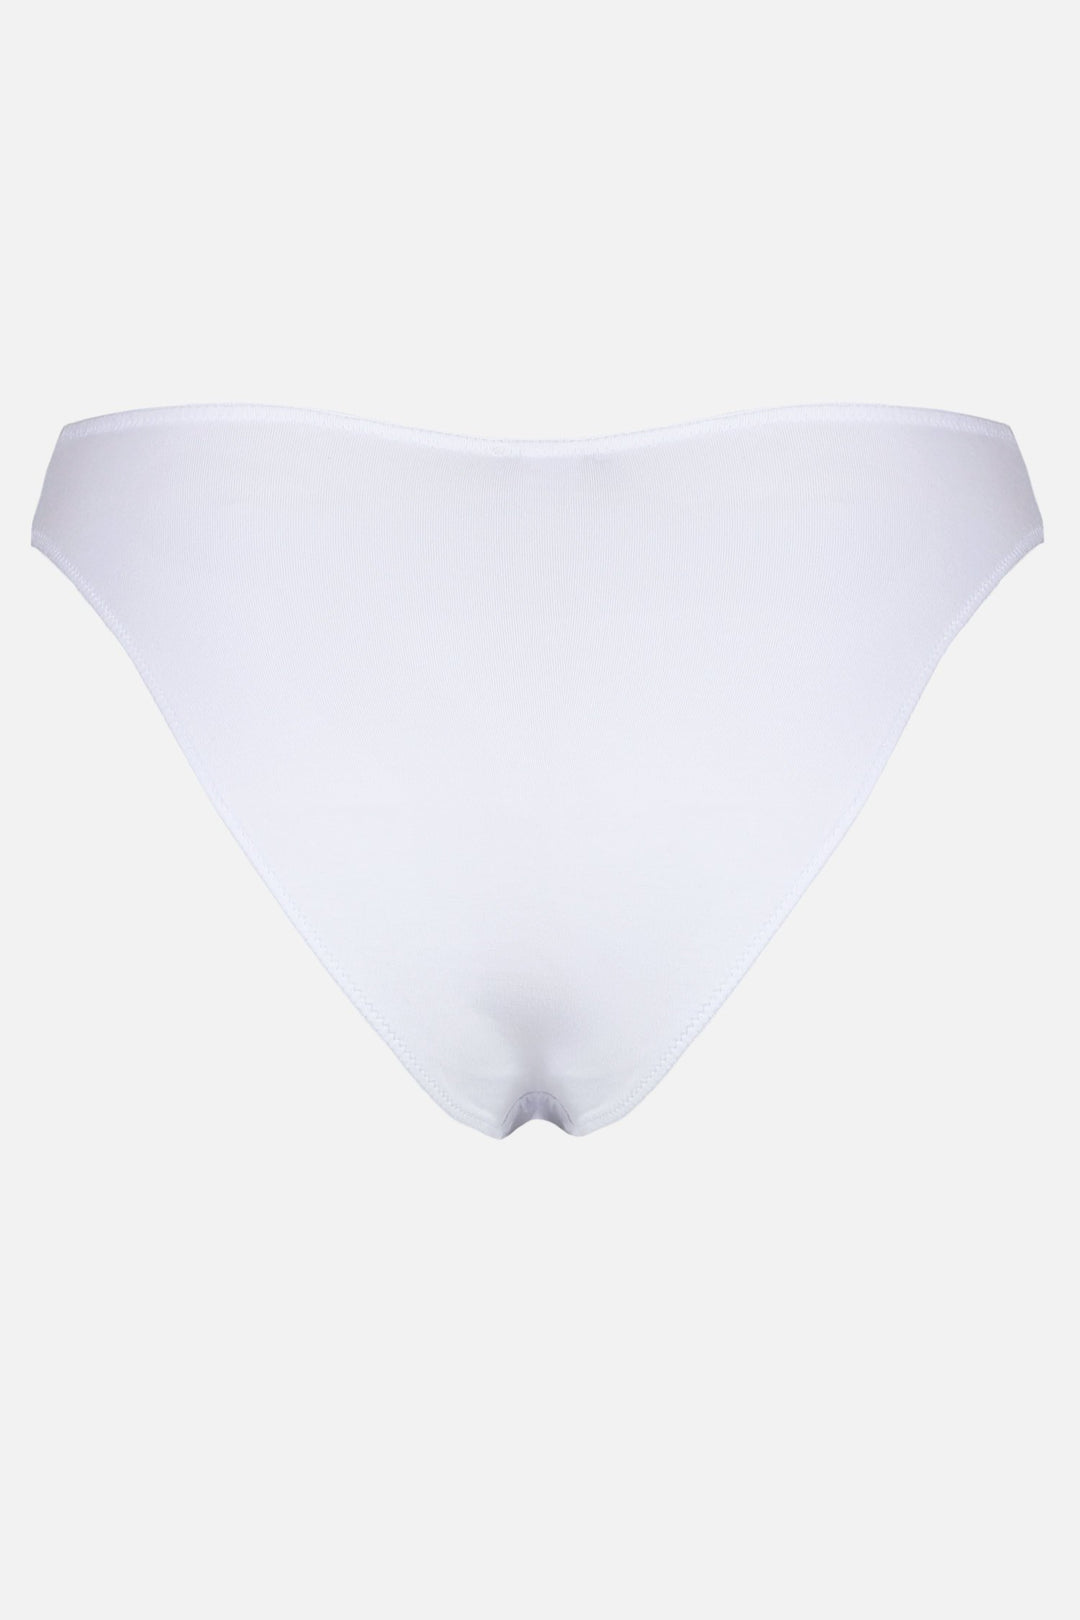 Videris Lingerie bikini knicker in white TENCEL™ mid-rise style with cheeky bottom coverage and soft elastics